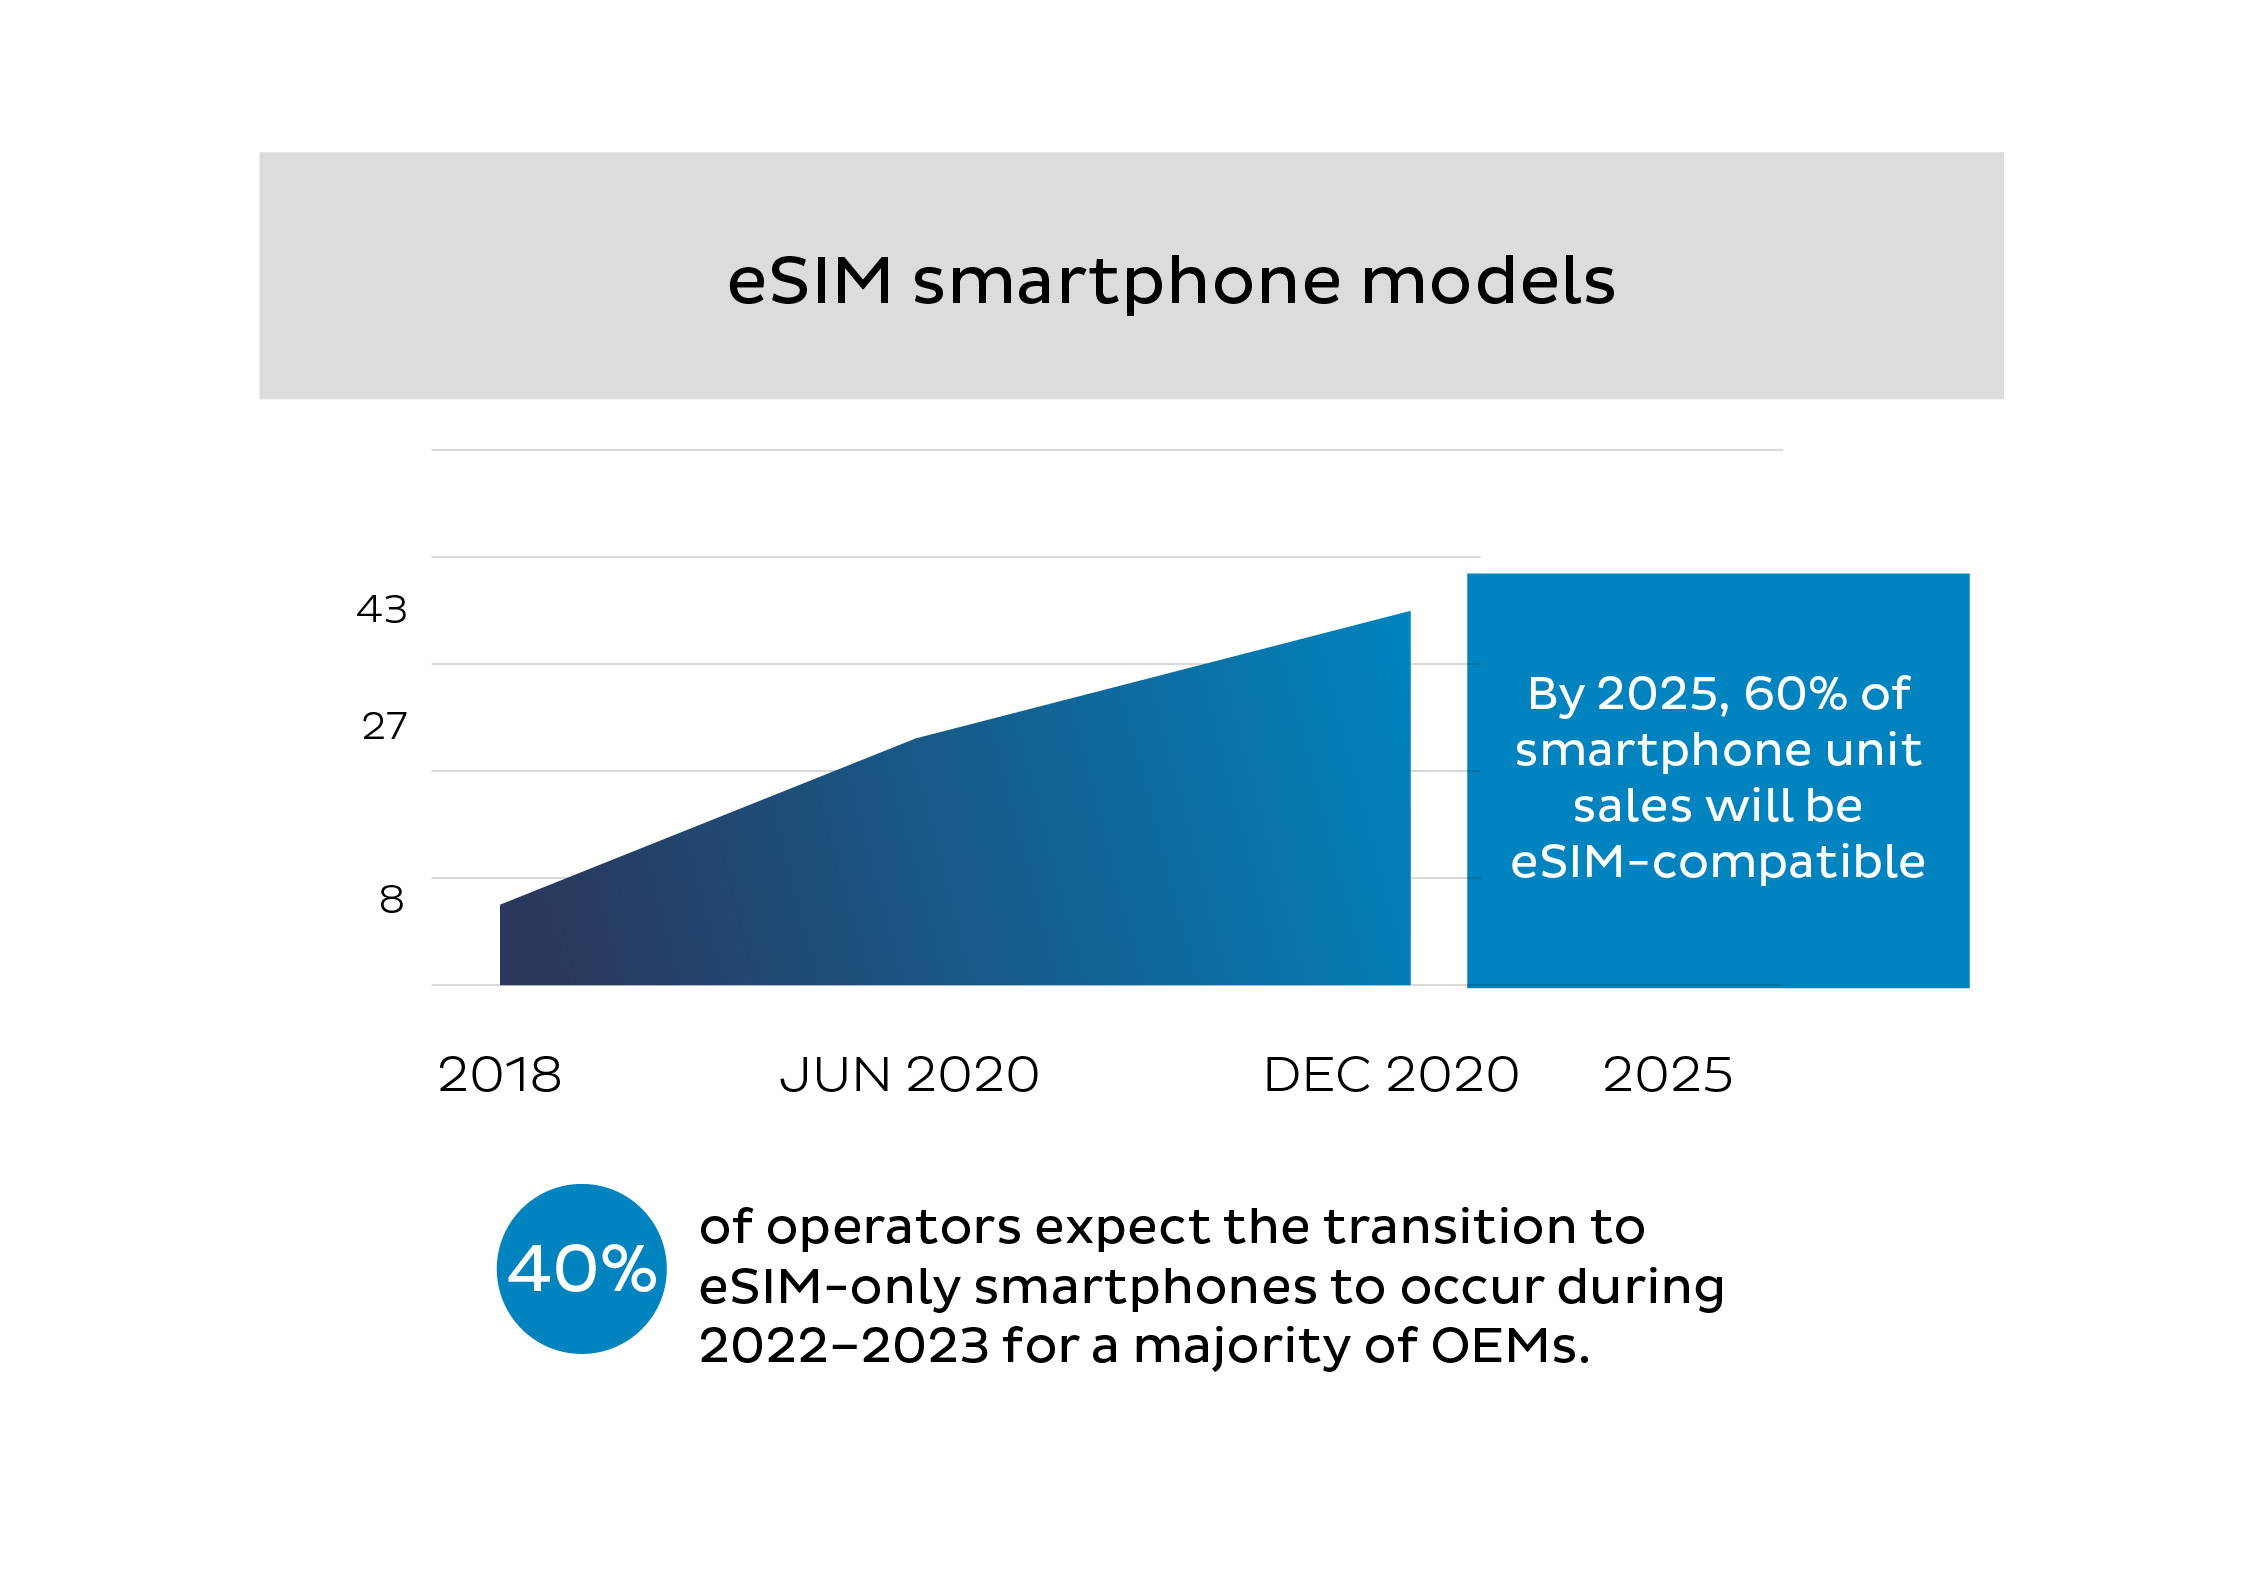 Graph titled eSIM smartphone models. The graph shows the number of eSIM-capable devices over the last years (since 2018) and predictions for the future of eSIM capable devices and their number